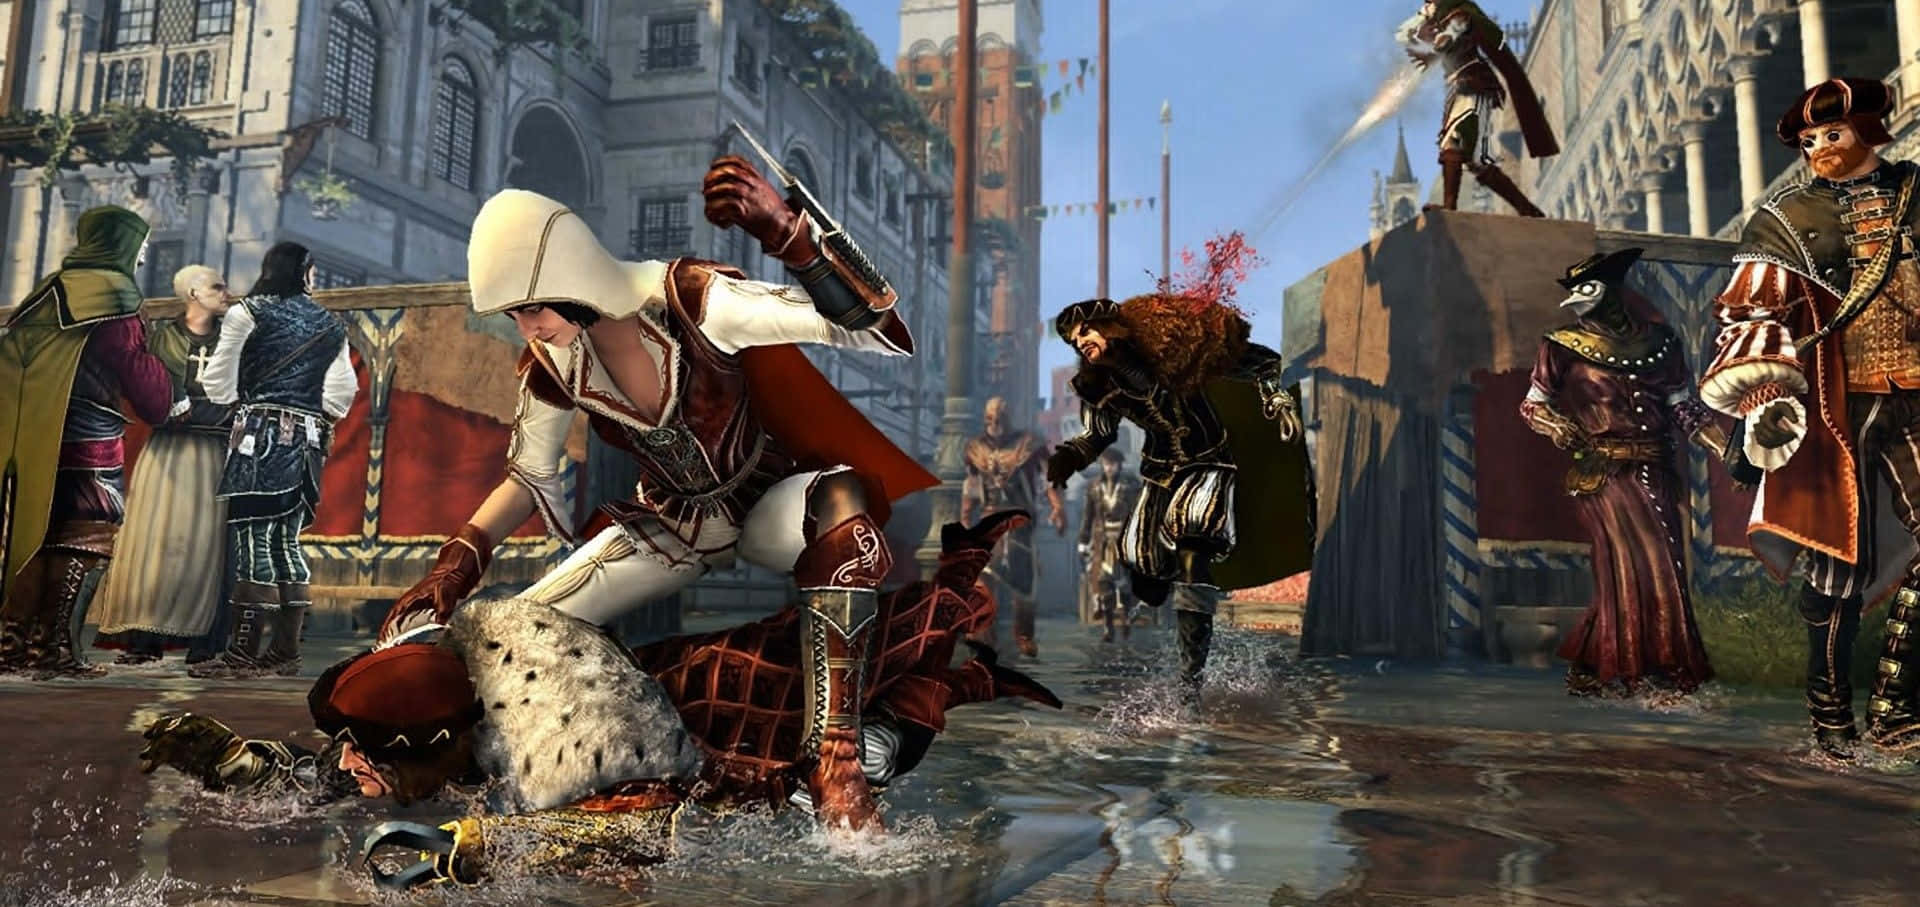 Ezio Auditore in action amid ancient Rome in Assassin's Creed Brotherhood Wallpaper